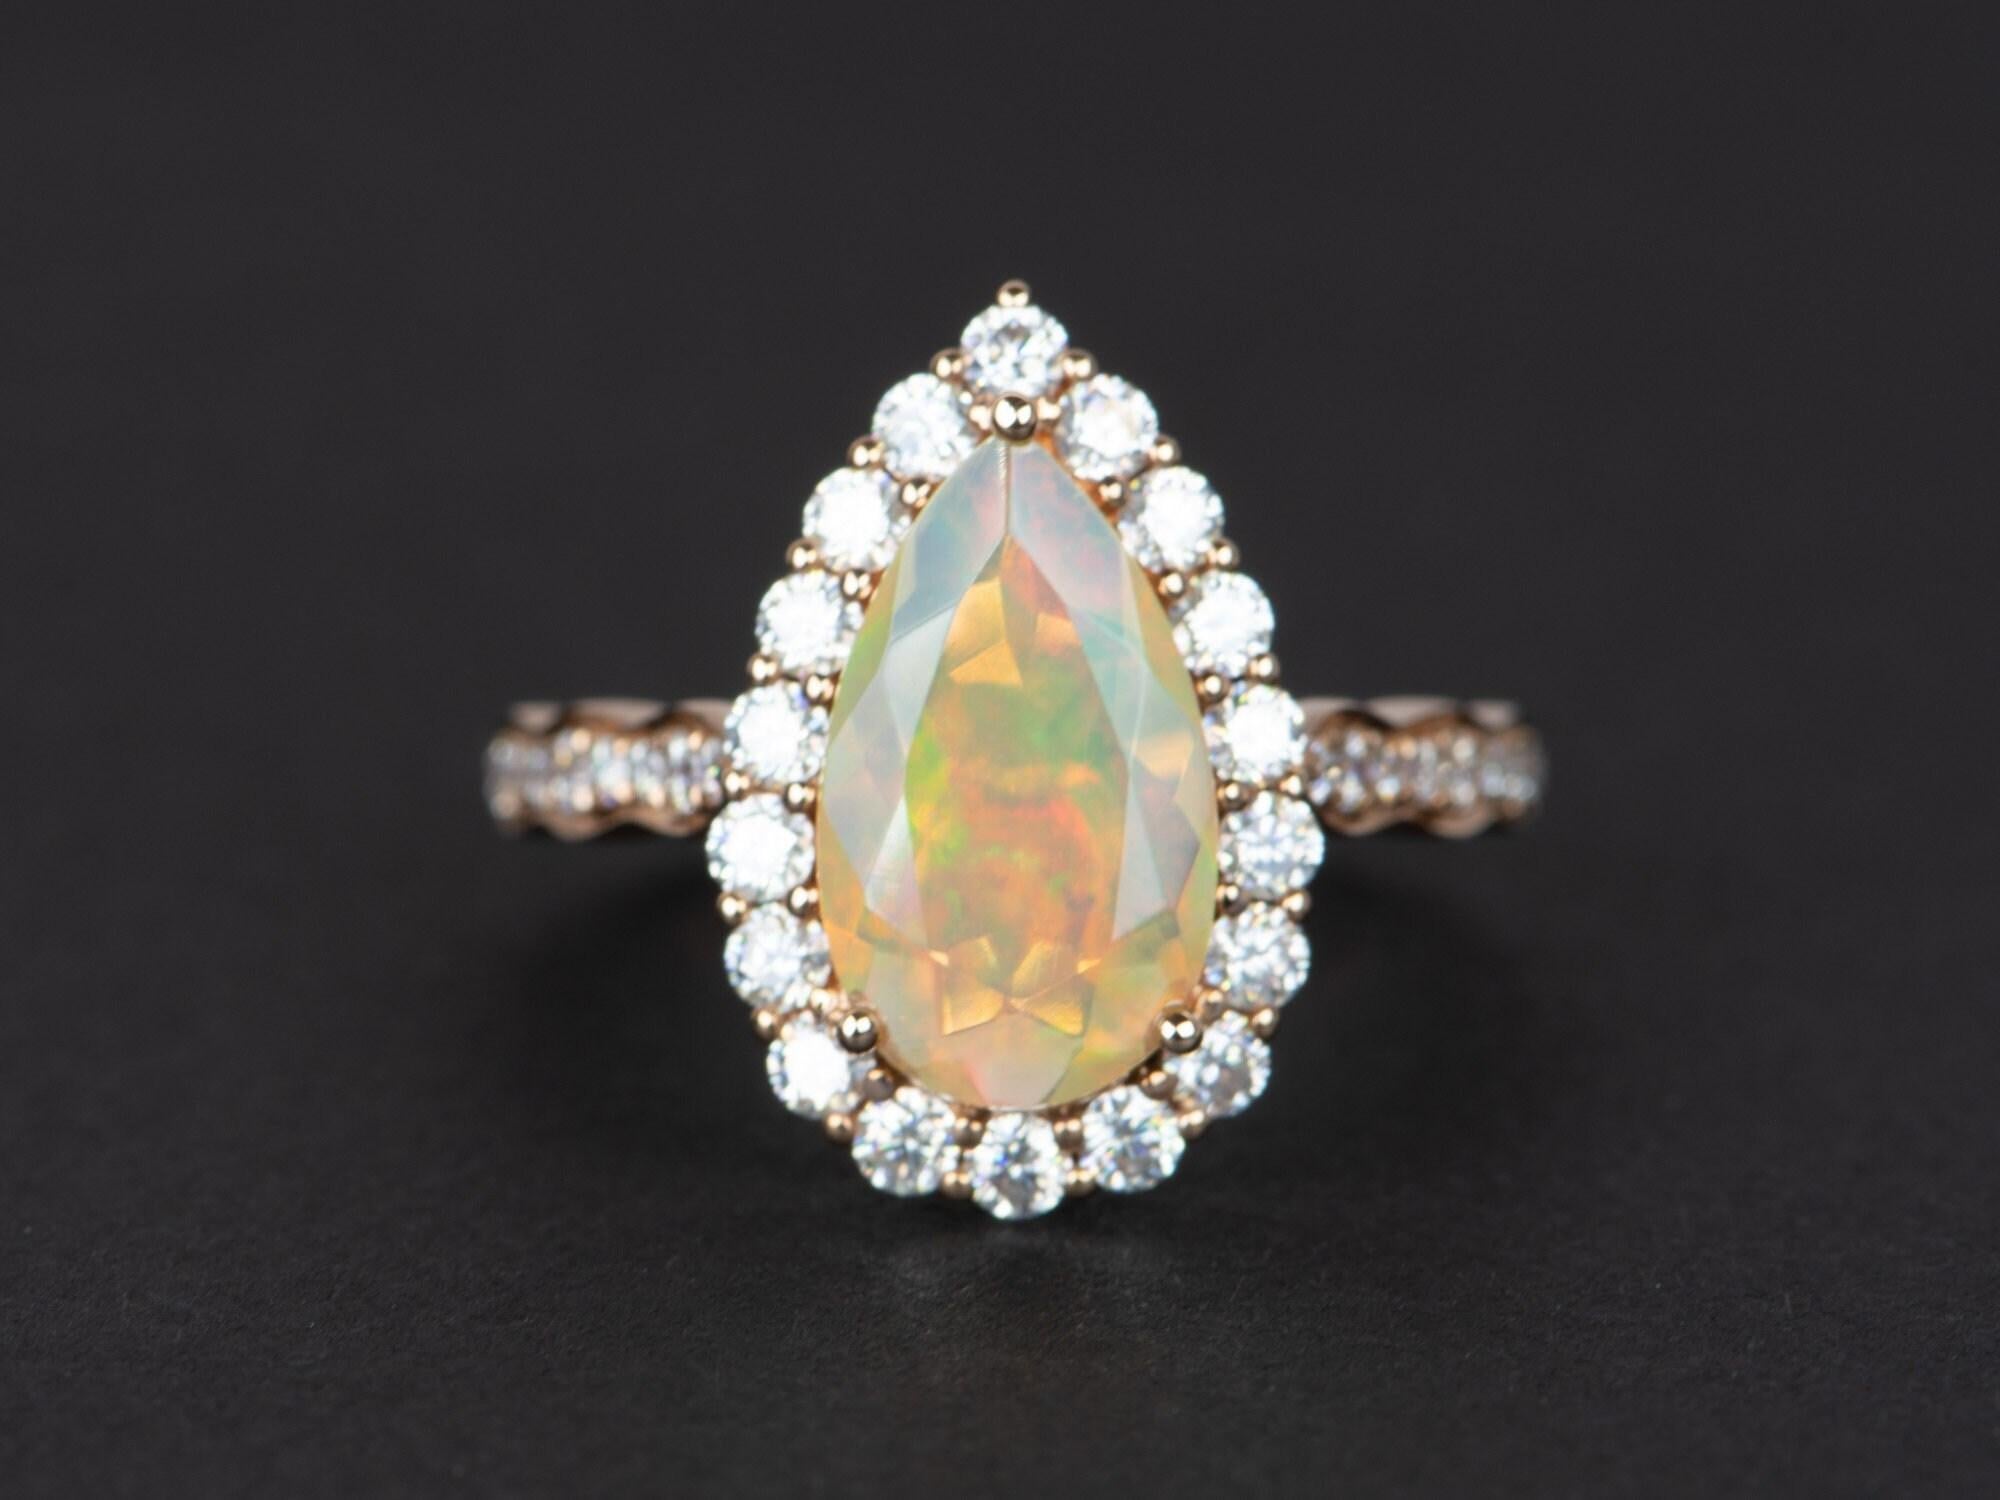 ♥ Solid 14K gold ring set with a beautiful pear-shaped Ethiopian opal in the center, flanked by a halo of bright white moissanites. The shank is also decorated with gradual-sized moissanites for maximum sparkle!
♥ The opal is incredibly fiery with a